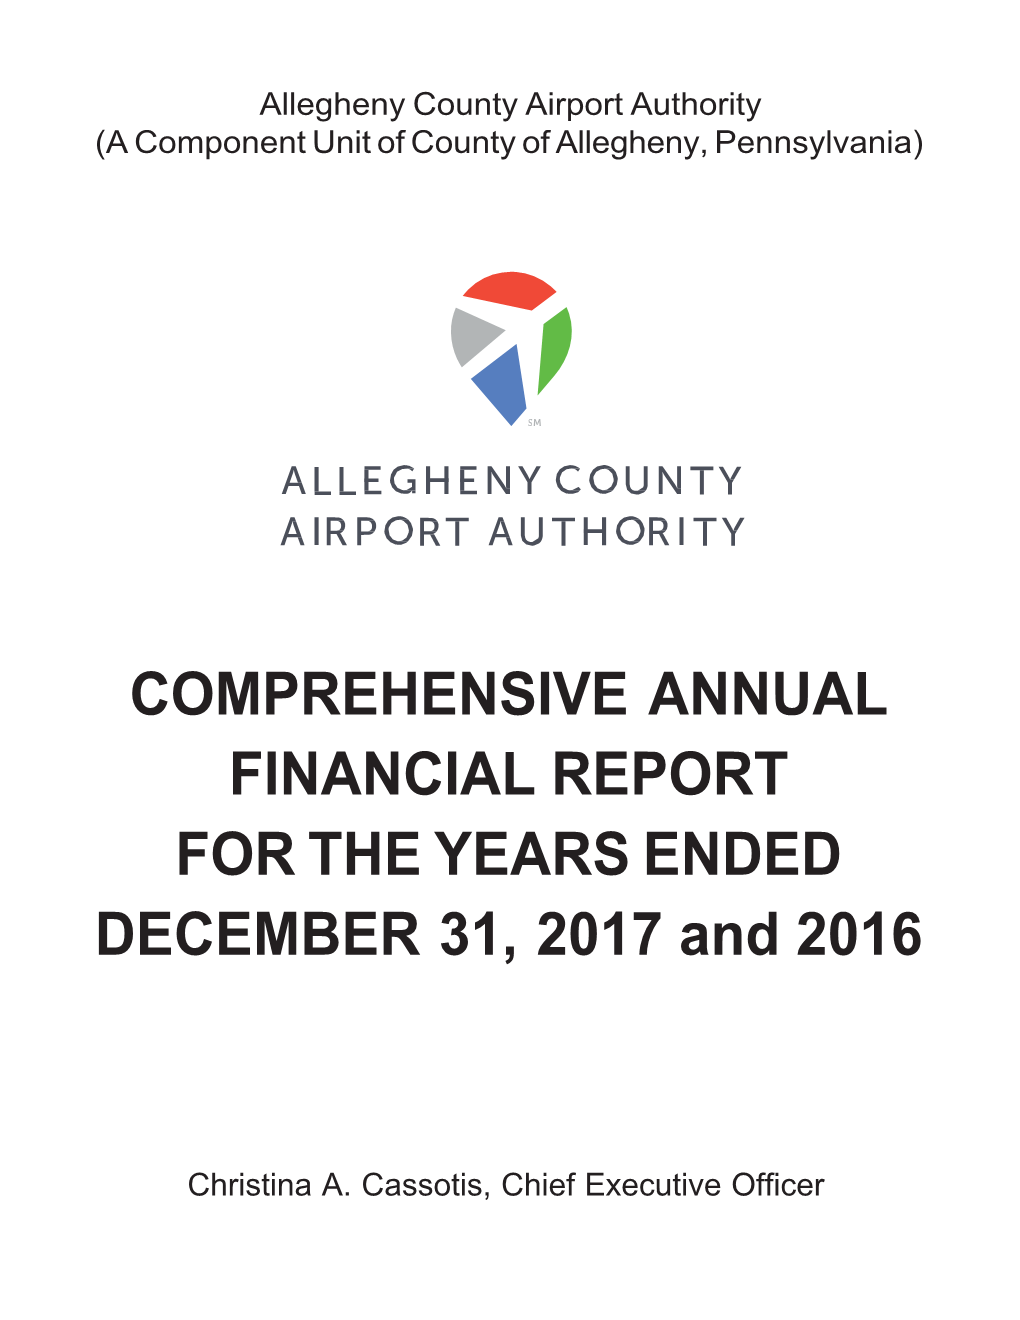 COMPREHENSIVE ANNUAL FINANCIAL REPORT for the YEARS ENDED DECEMBER 31, 2017 and 2016